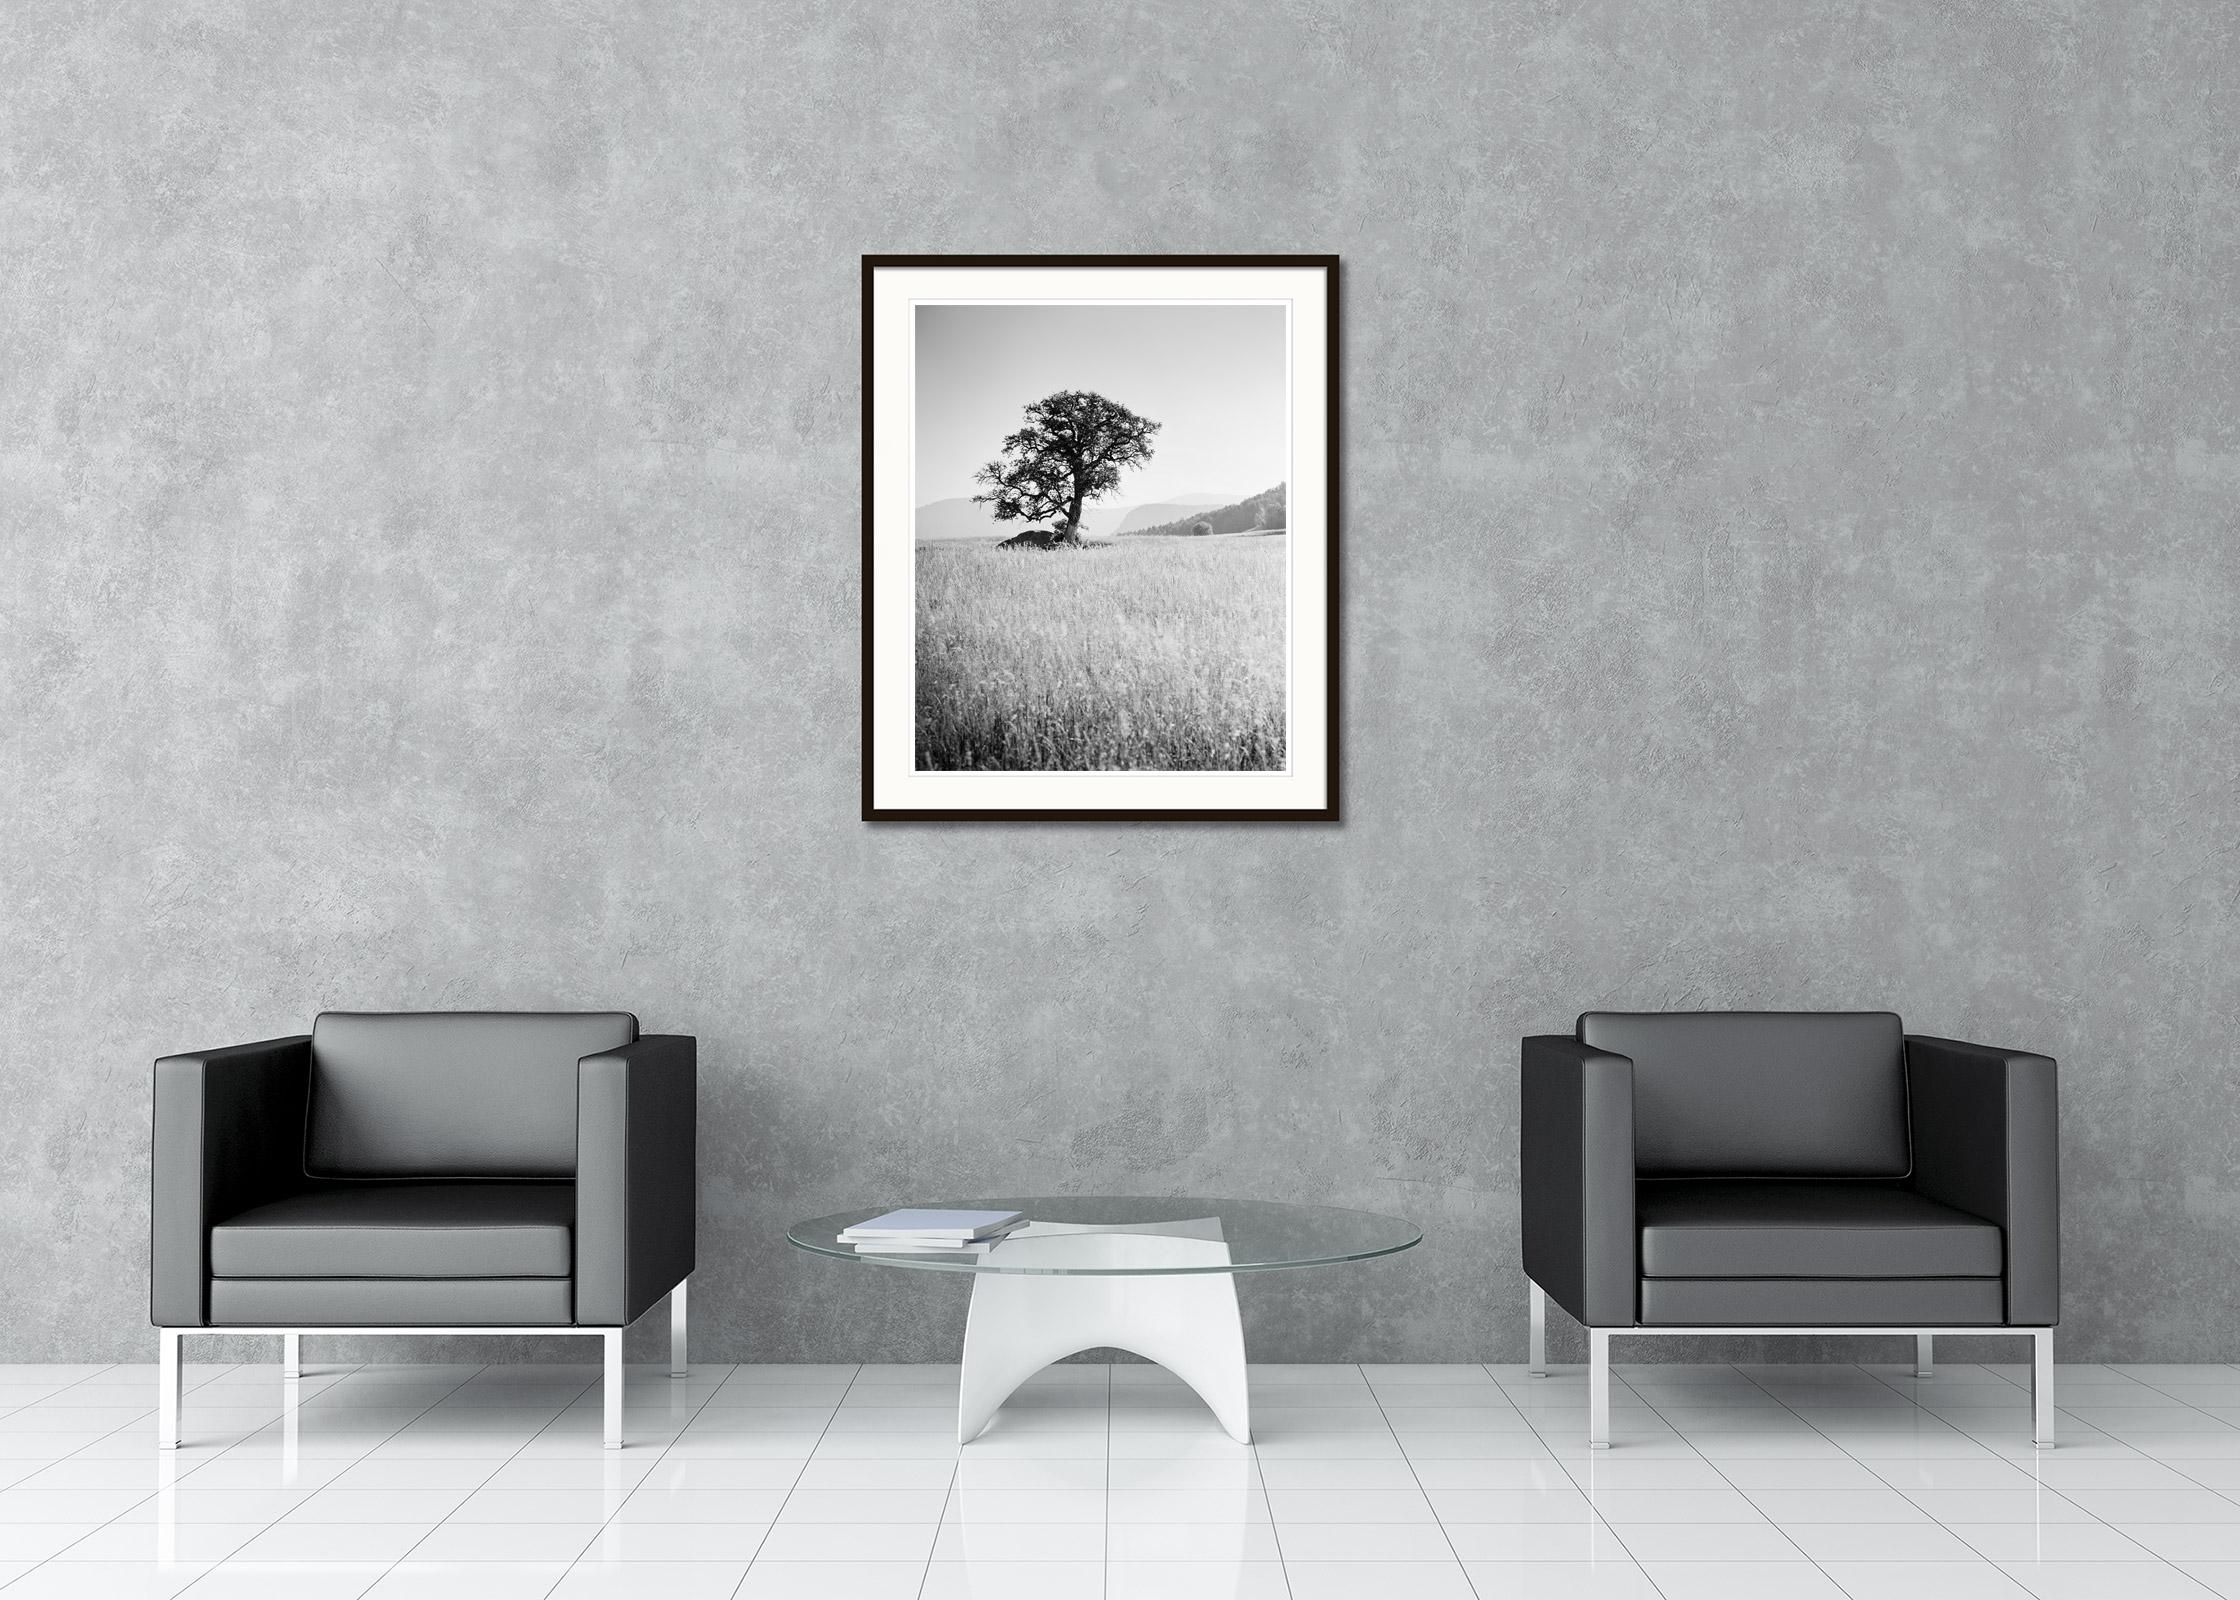 Black and white fine art landscape photography. Single tree in the cornfield at sunrise, Seiser Alm, Italy. Archival pigment ink print, edition of 7. Signed, titled, dated and numbered by artist. Certificate of authenticity included. Printed with